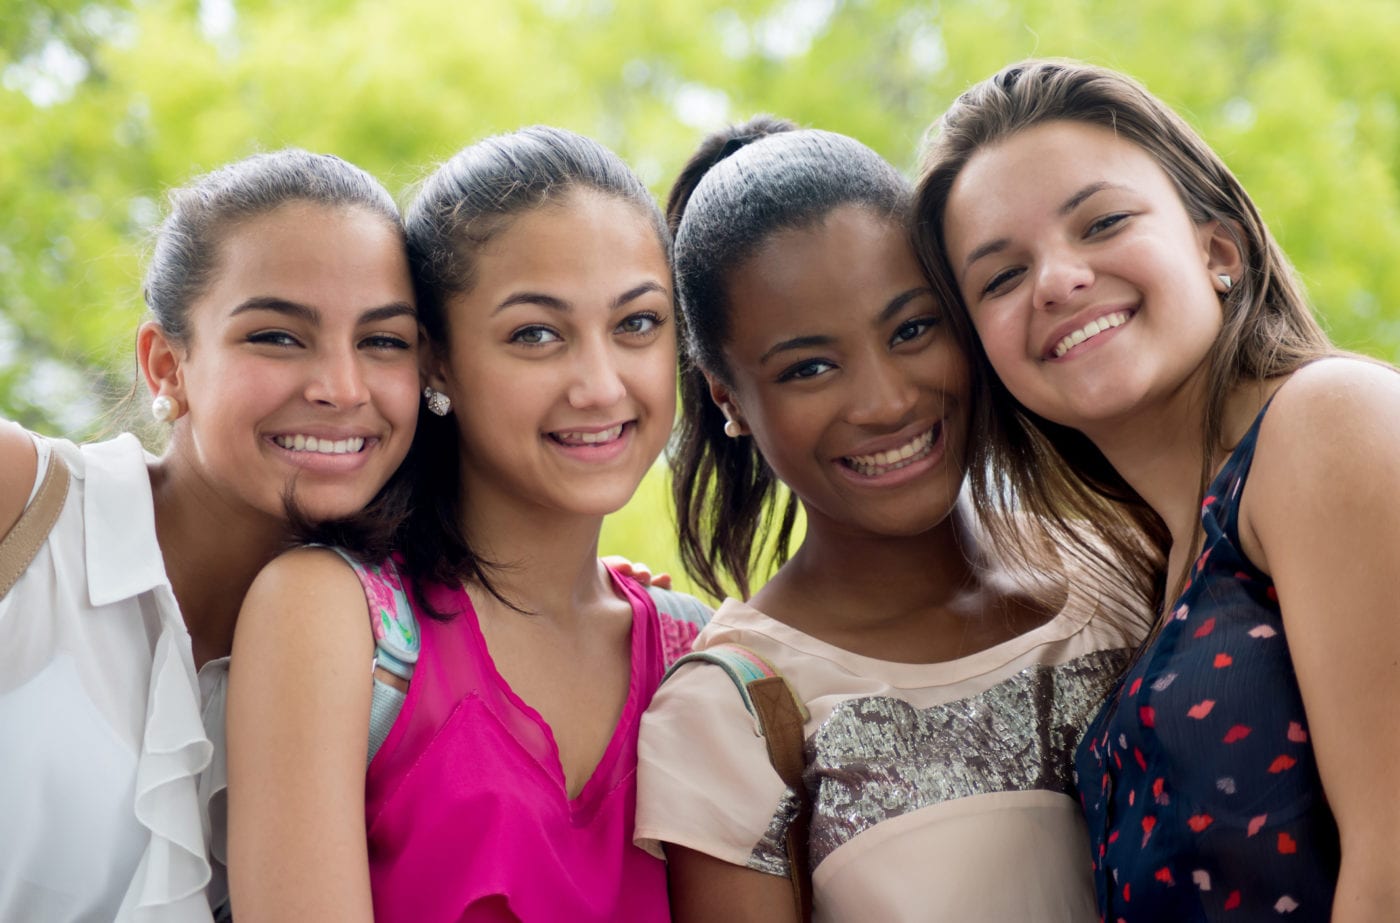 teenagers girls Group of Healthy Tanned Smiling Summer Teenagers Stock Photo ...